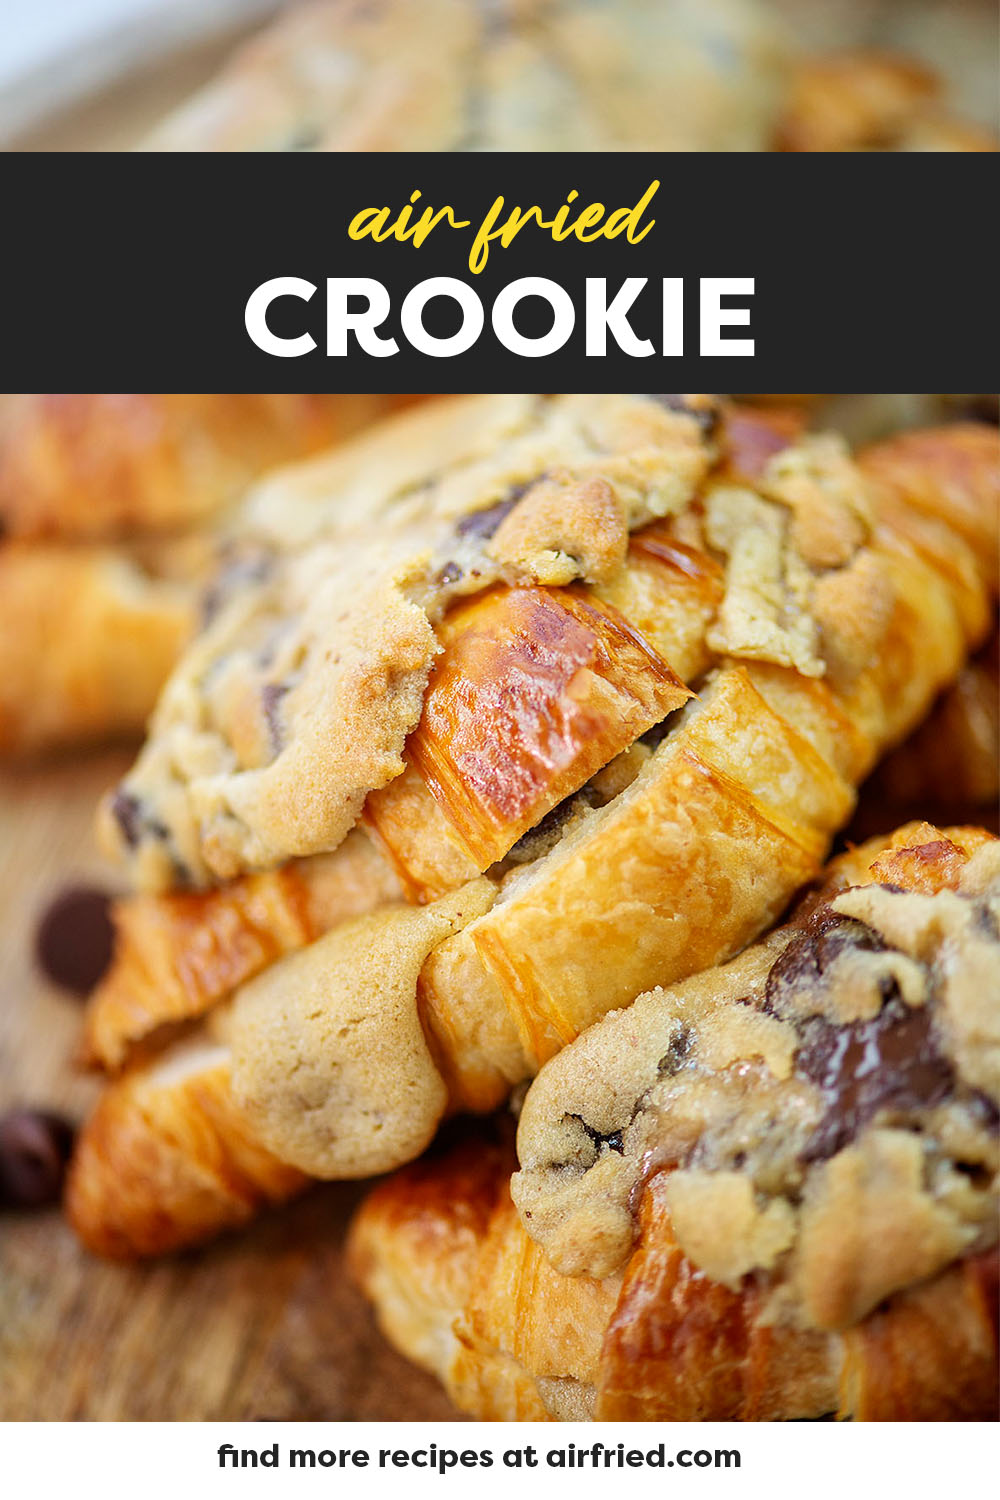 These Air Fryer Crookies, or croissant cookies, feature buttery croissants stuffed and topped with gooey, melty chocolate chip cookie dough! Just two ingredients and 3 minutes in the air fryer. These TikTok viral crookies are a must try! Straight from Paris - try Le Crookie yourself at home!